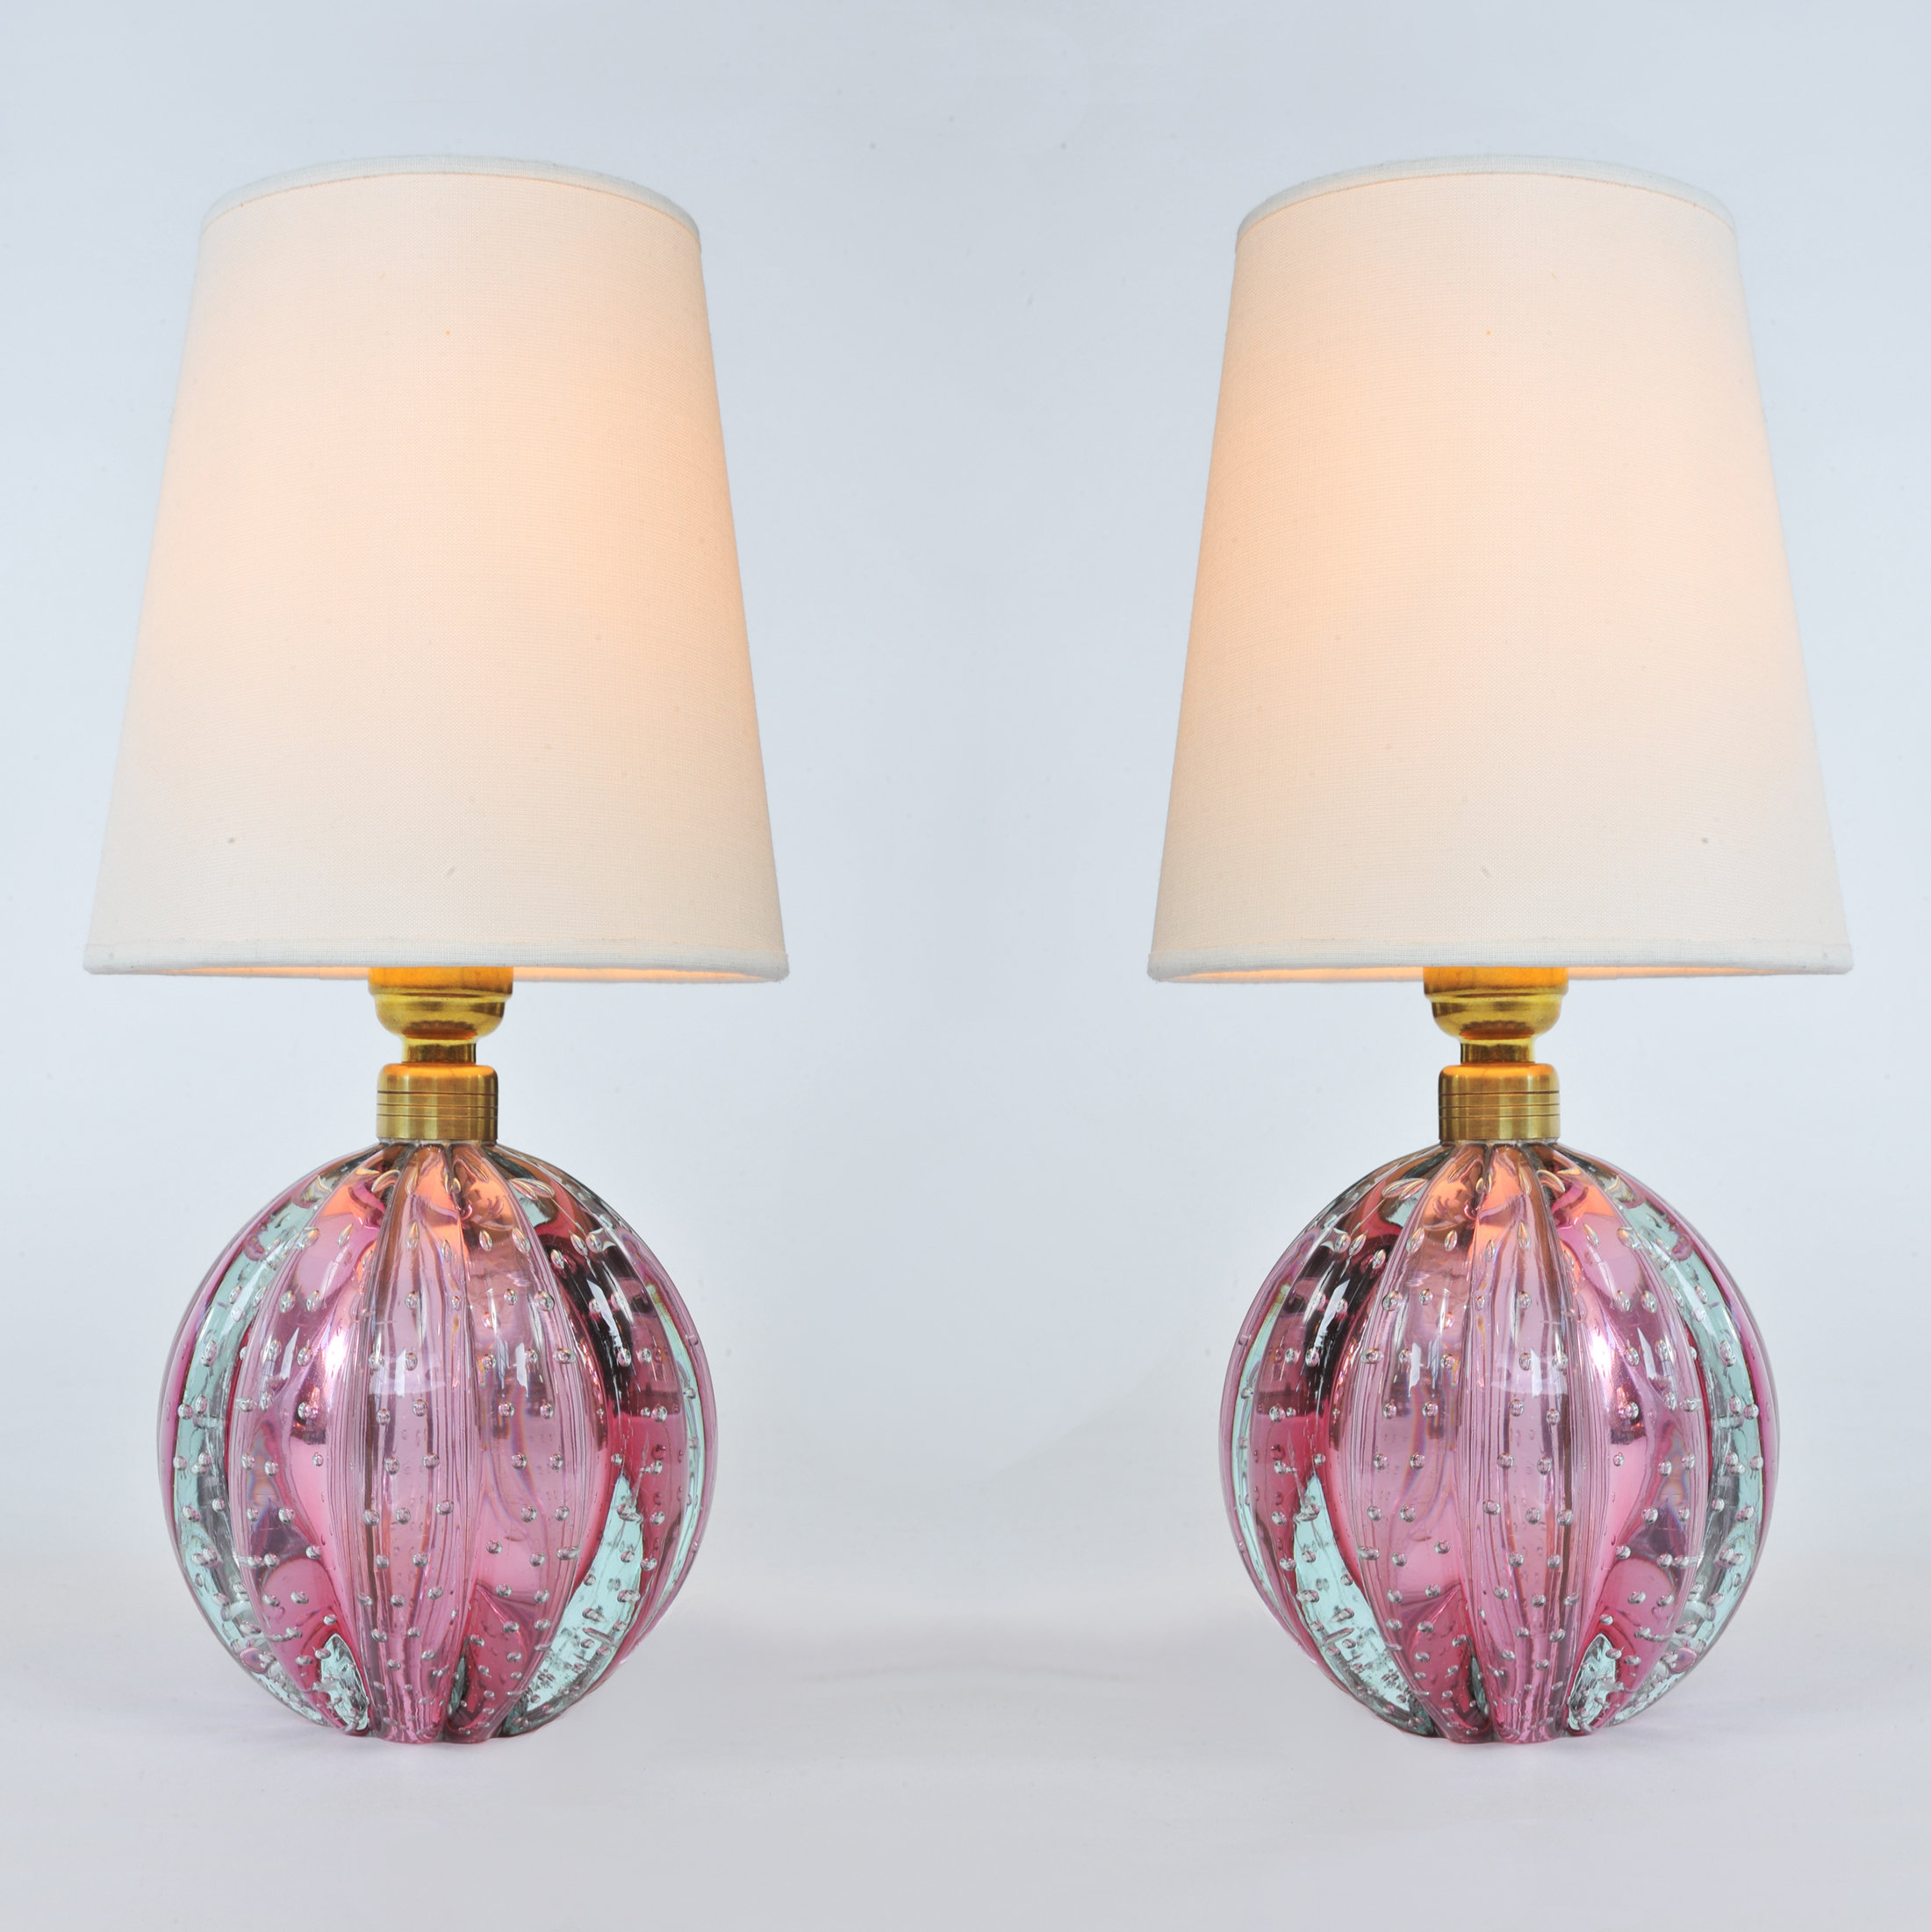 The image for Valerie Wade Lt649 Pair 1950S Two Tone Murano Ball Lamps 01